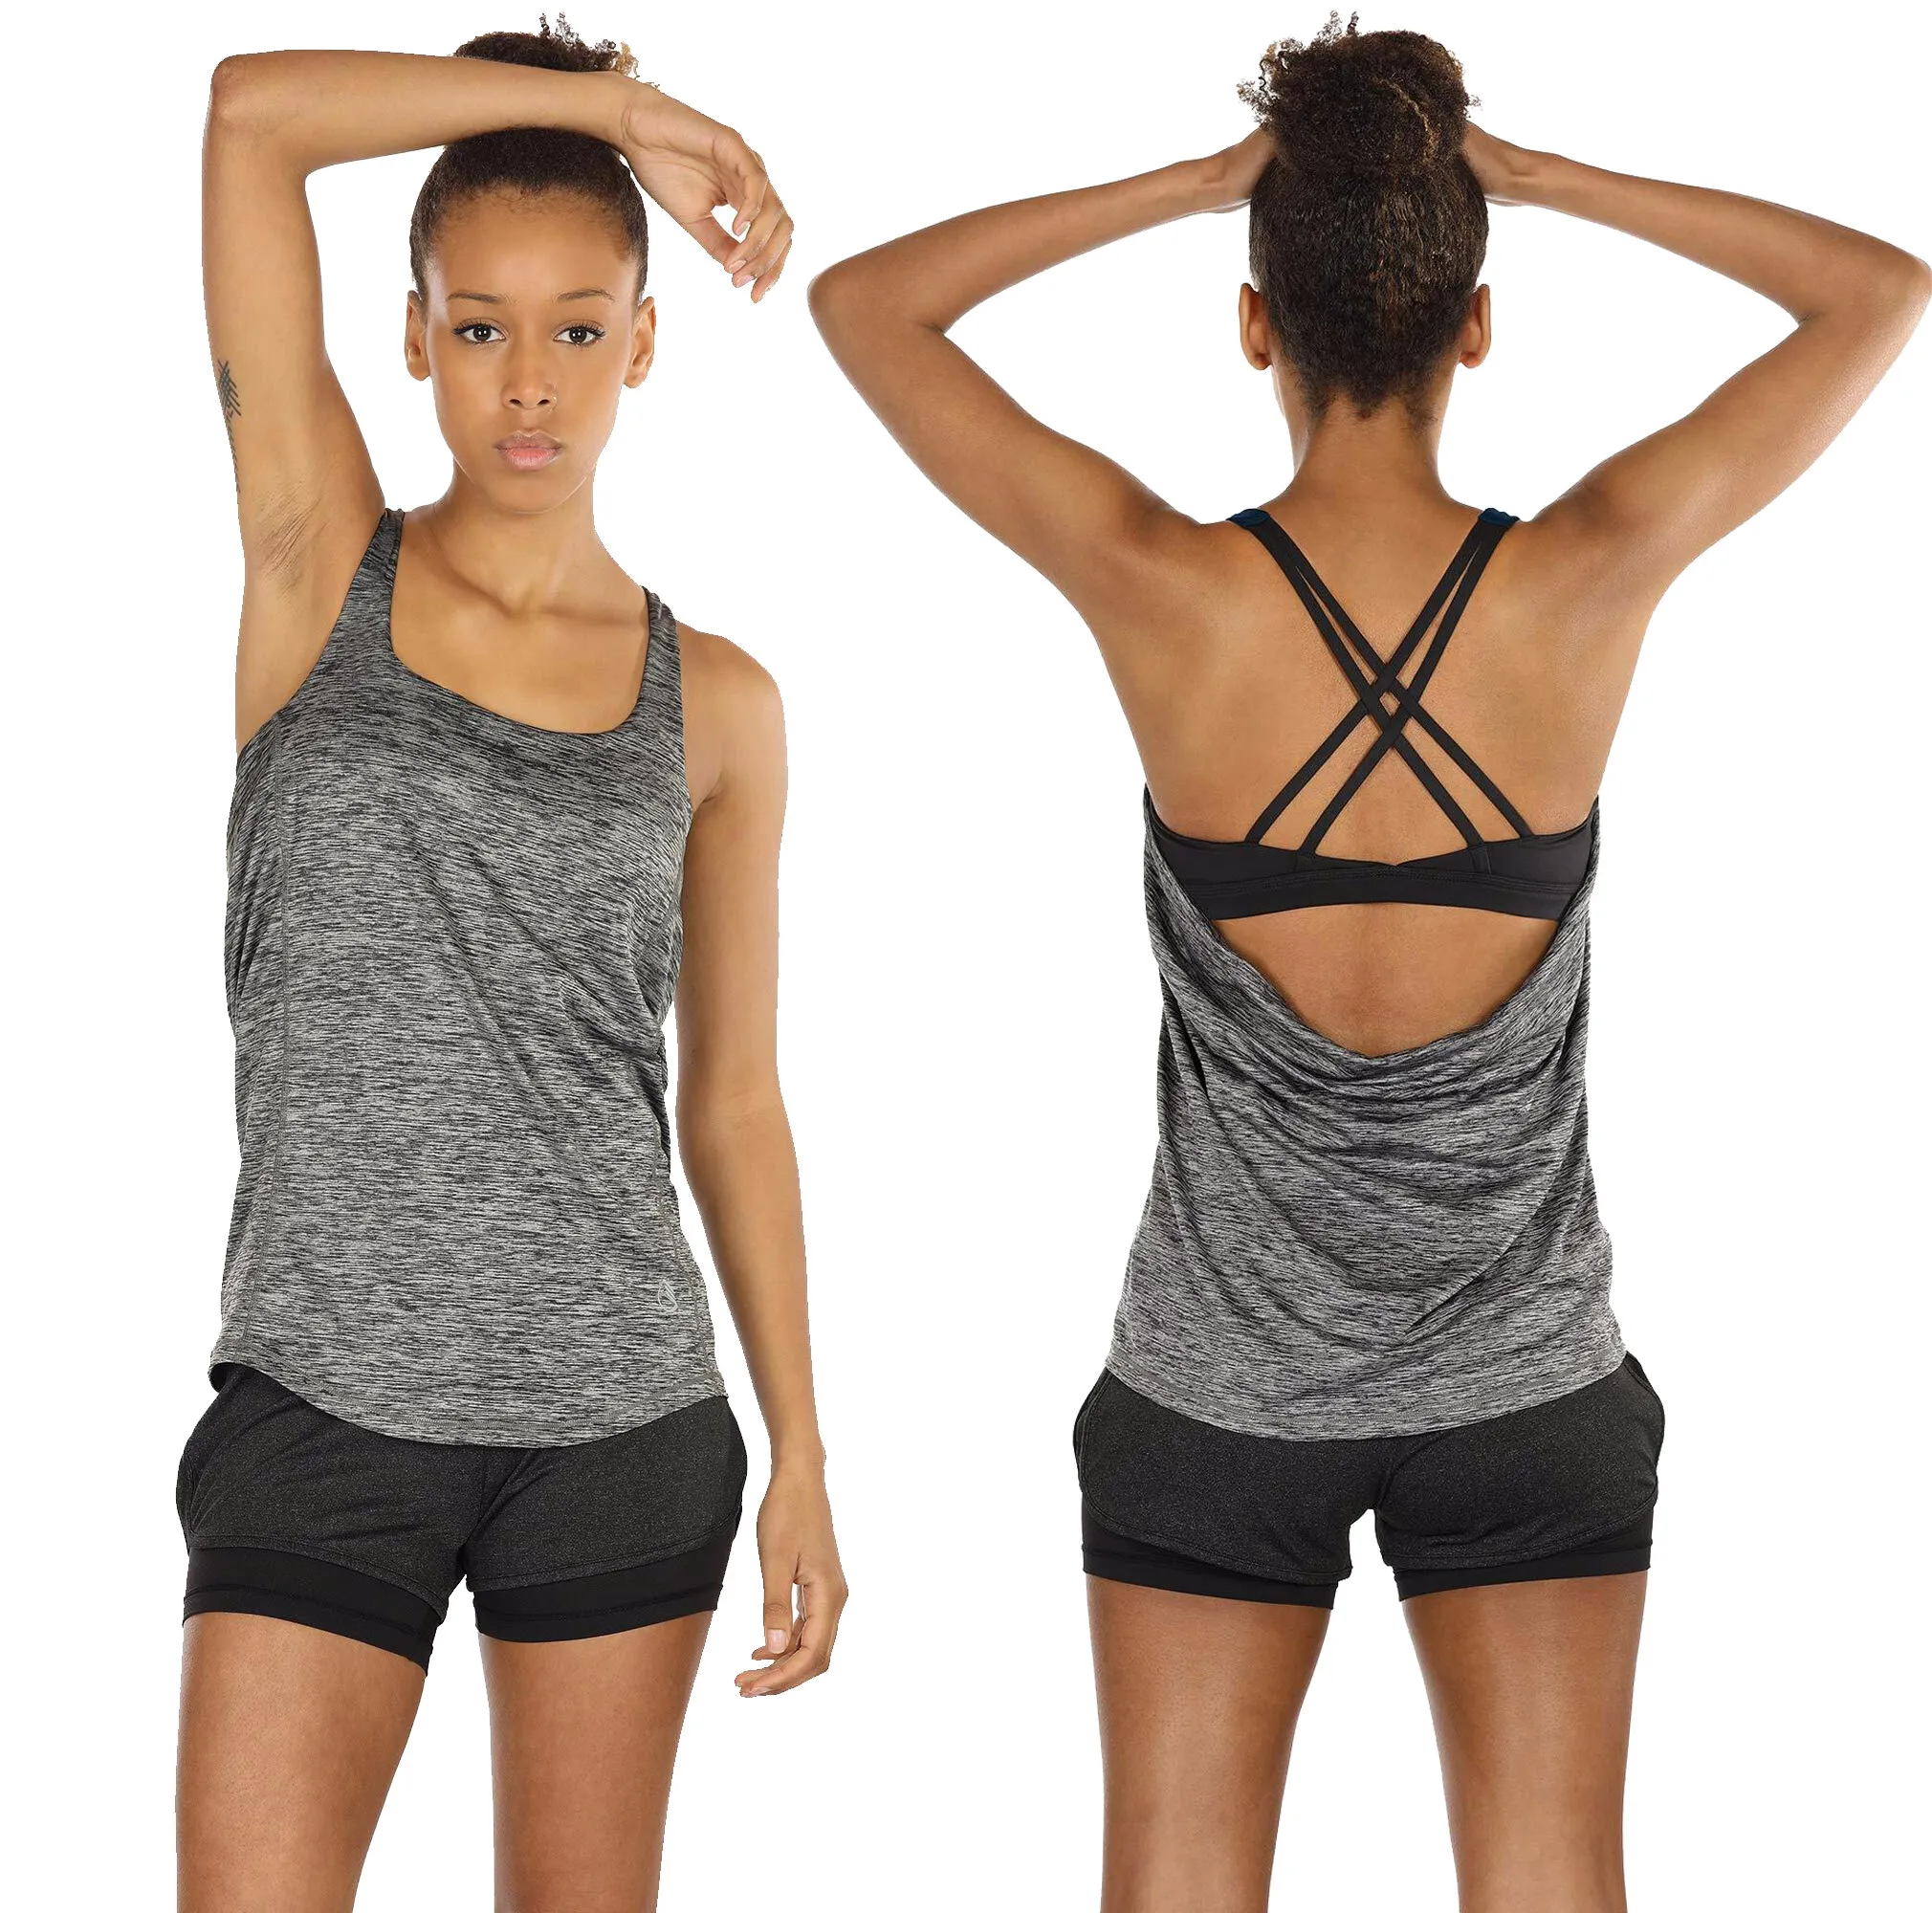 

Women Yoga Tops Vest Tank Strappy Athletic , Exercise Running Gym sports workout